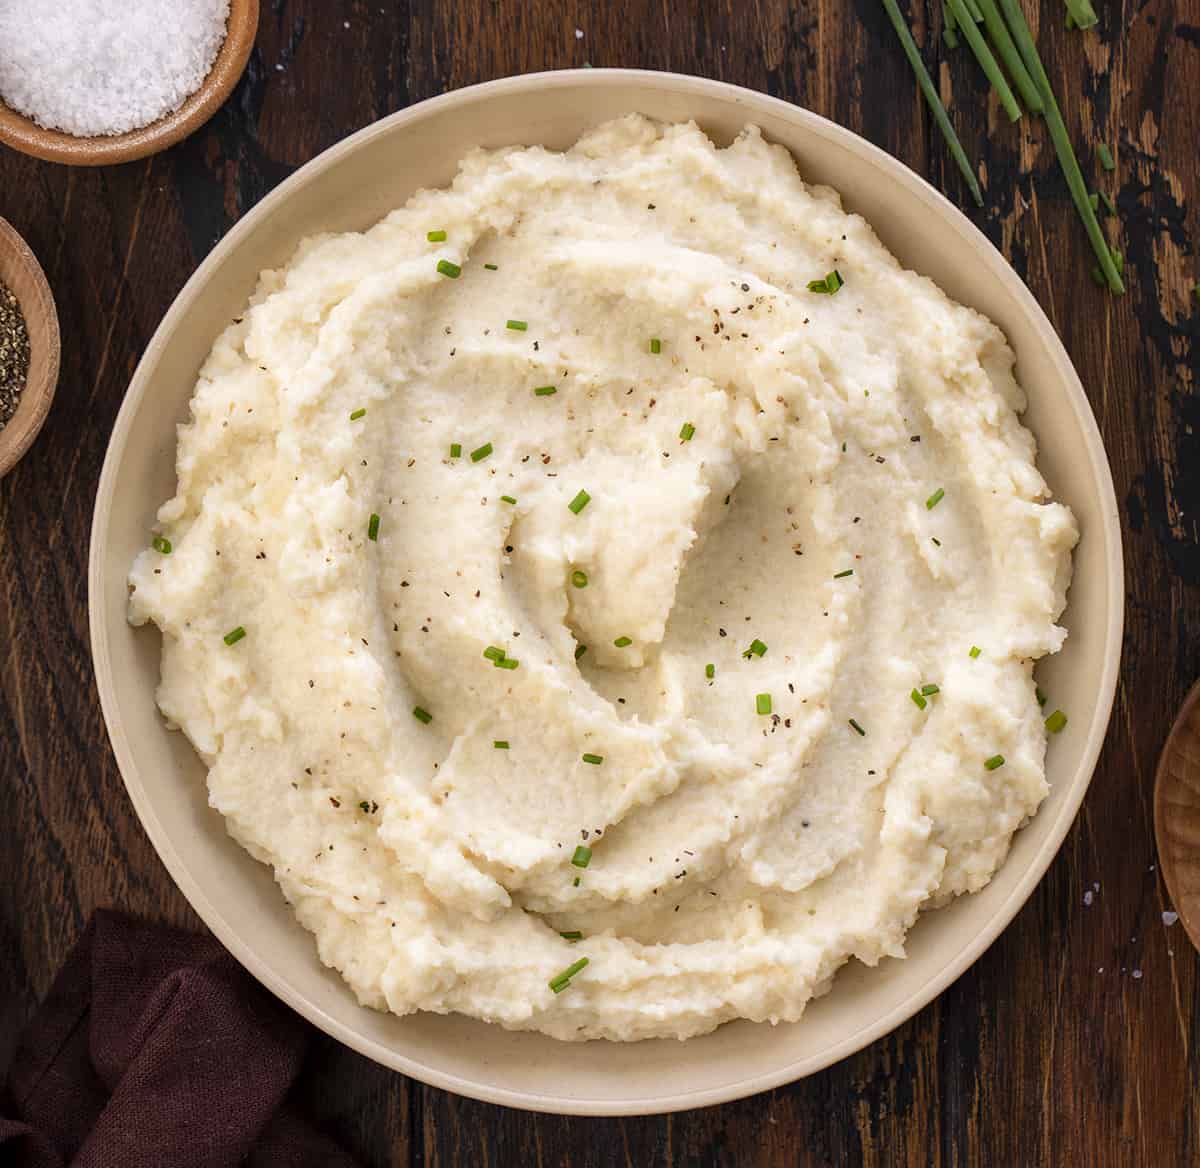 Bowl of Cauliflower Mashed Potatoes from Overhead